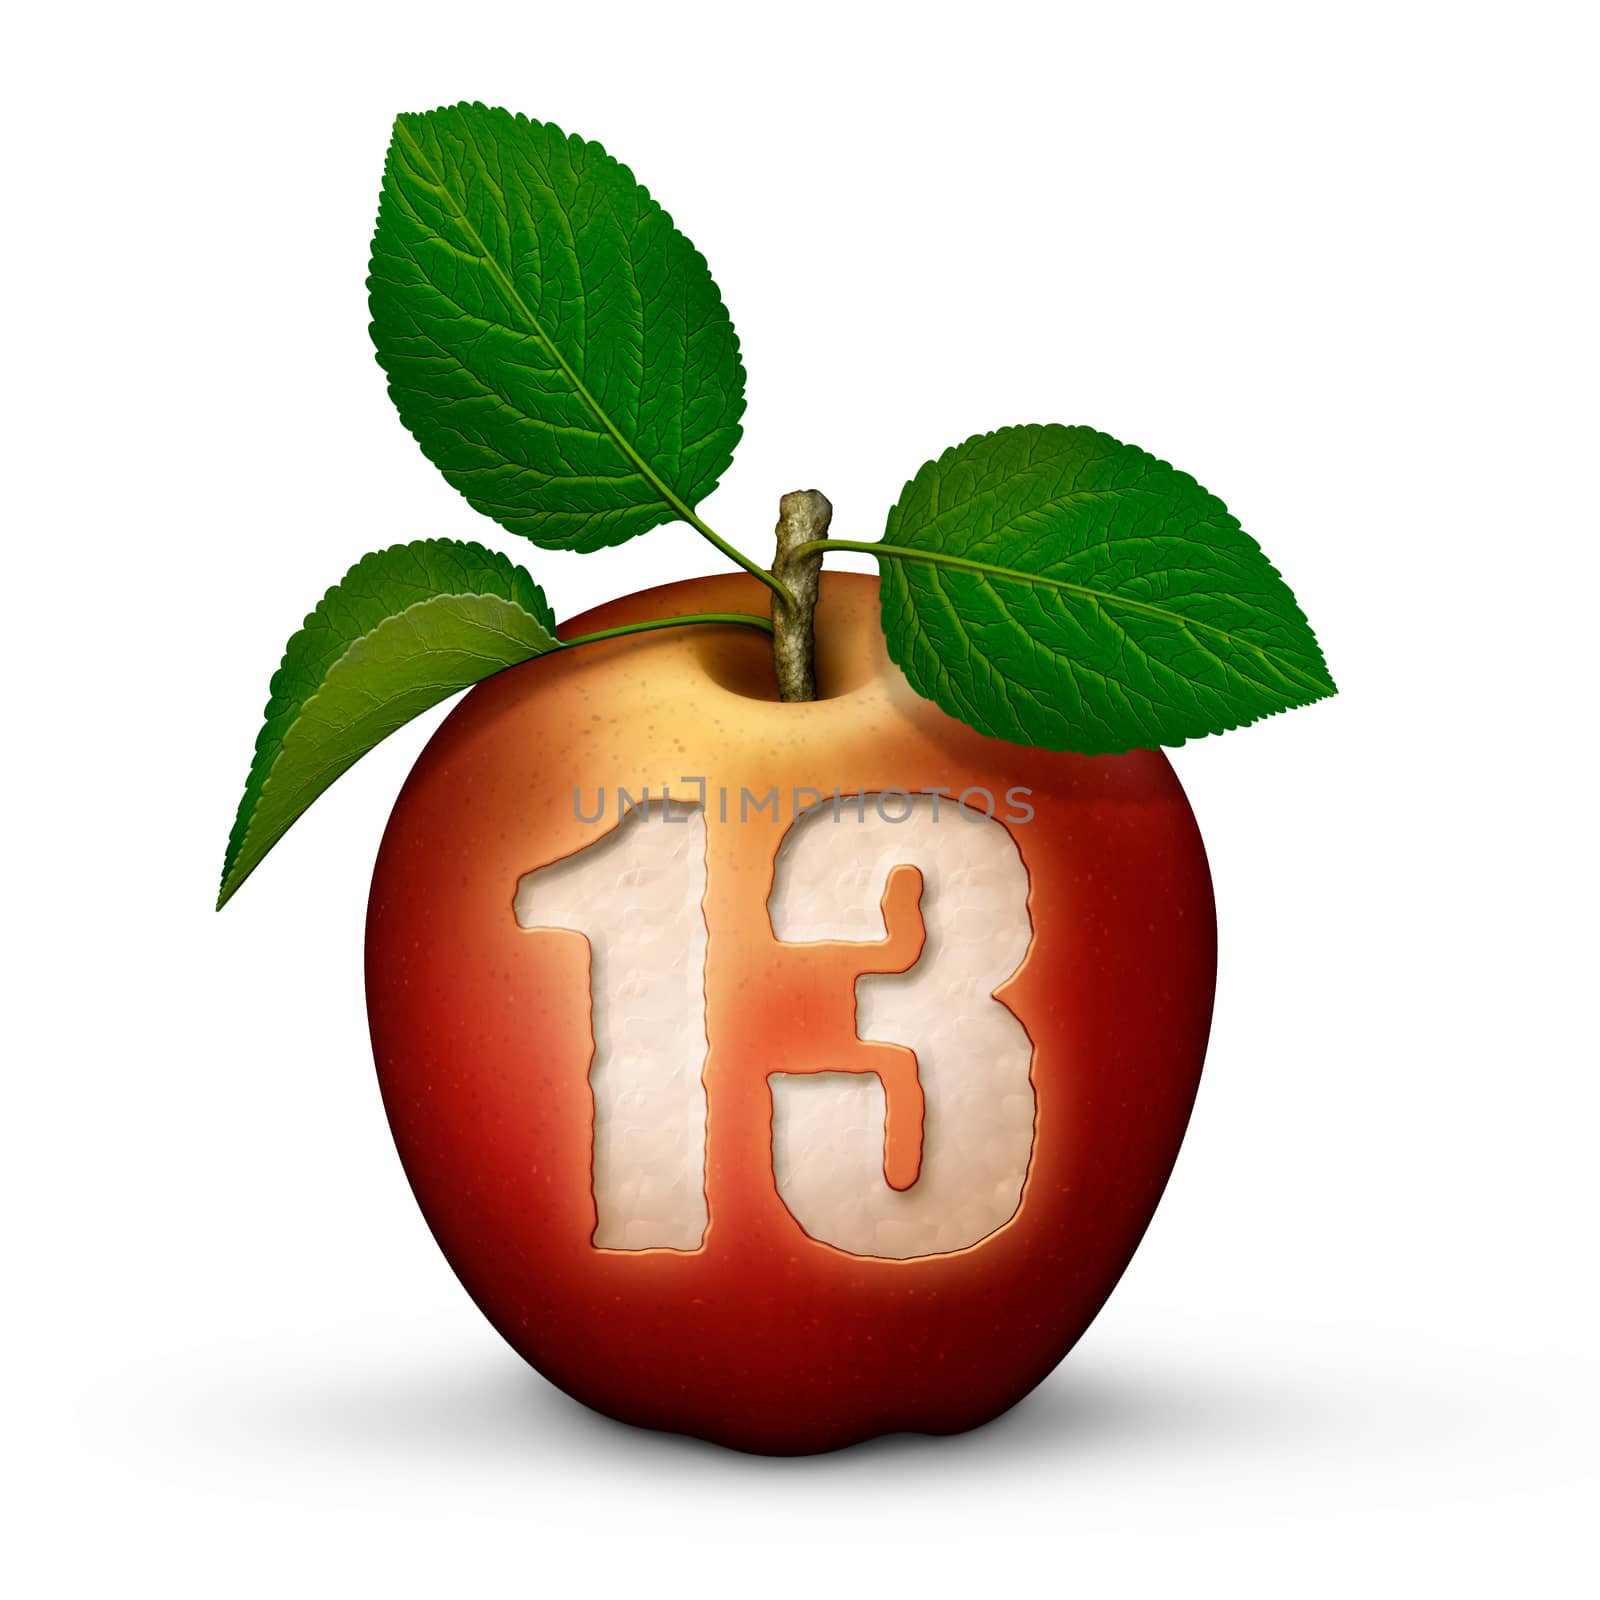 3D illustration of an apple with the number 13 bitten out of it.